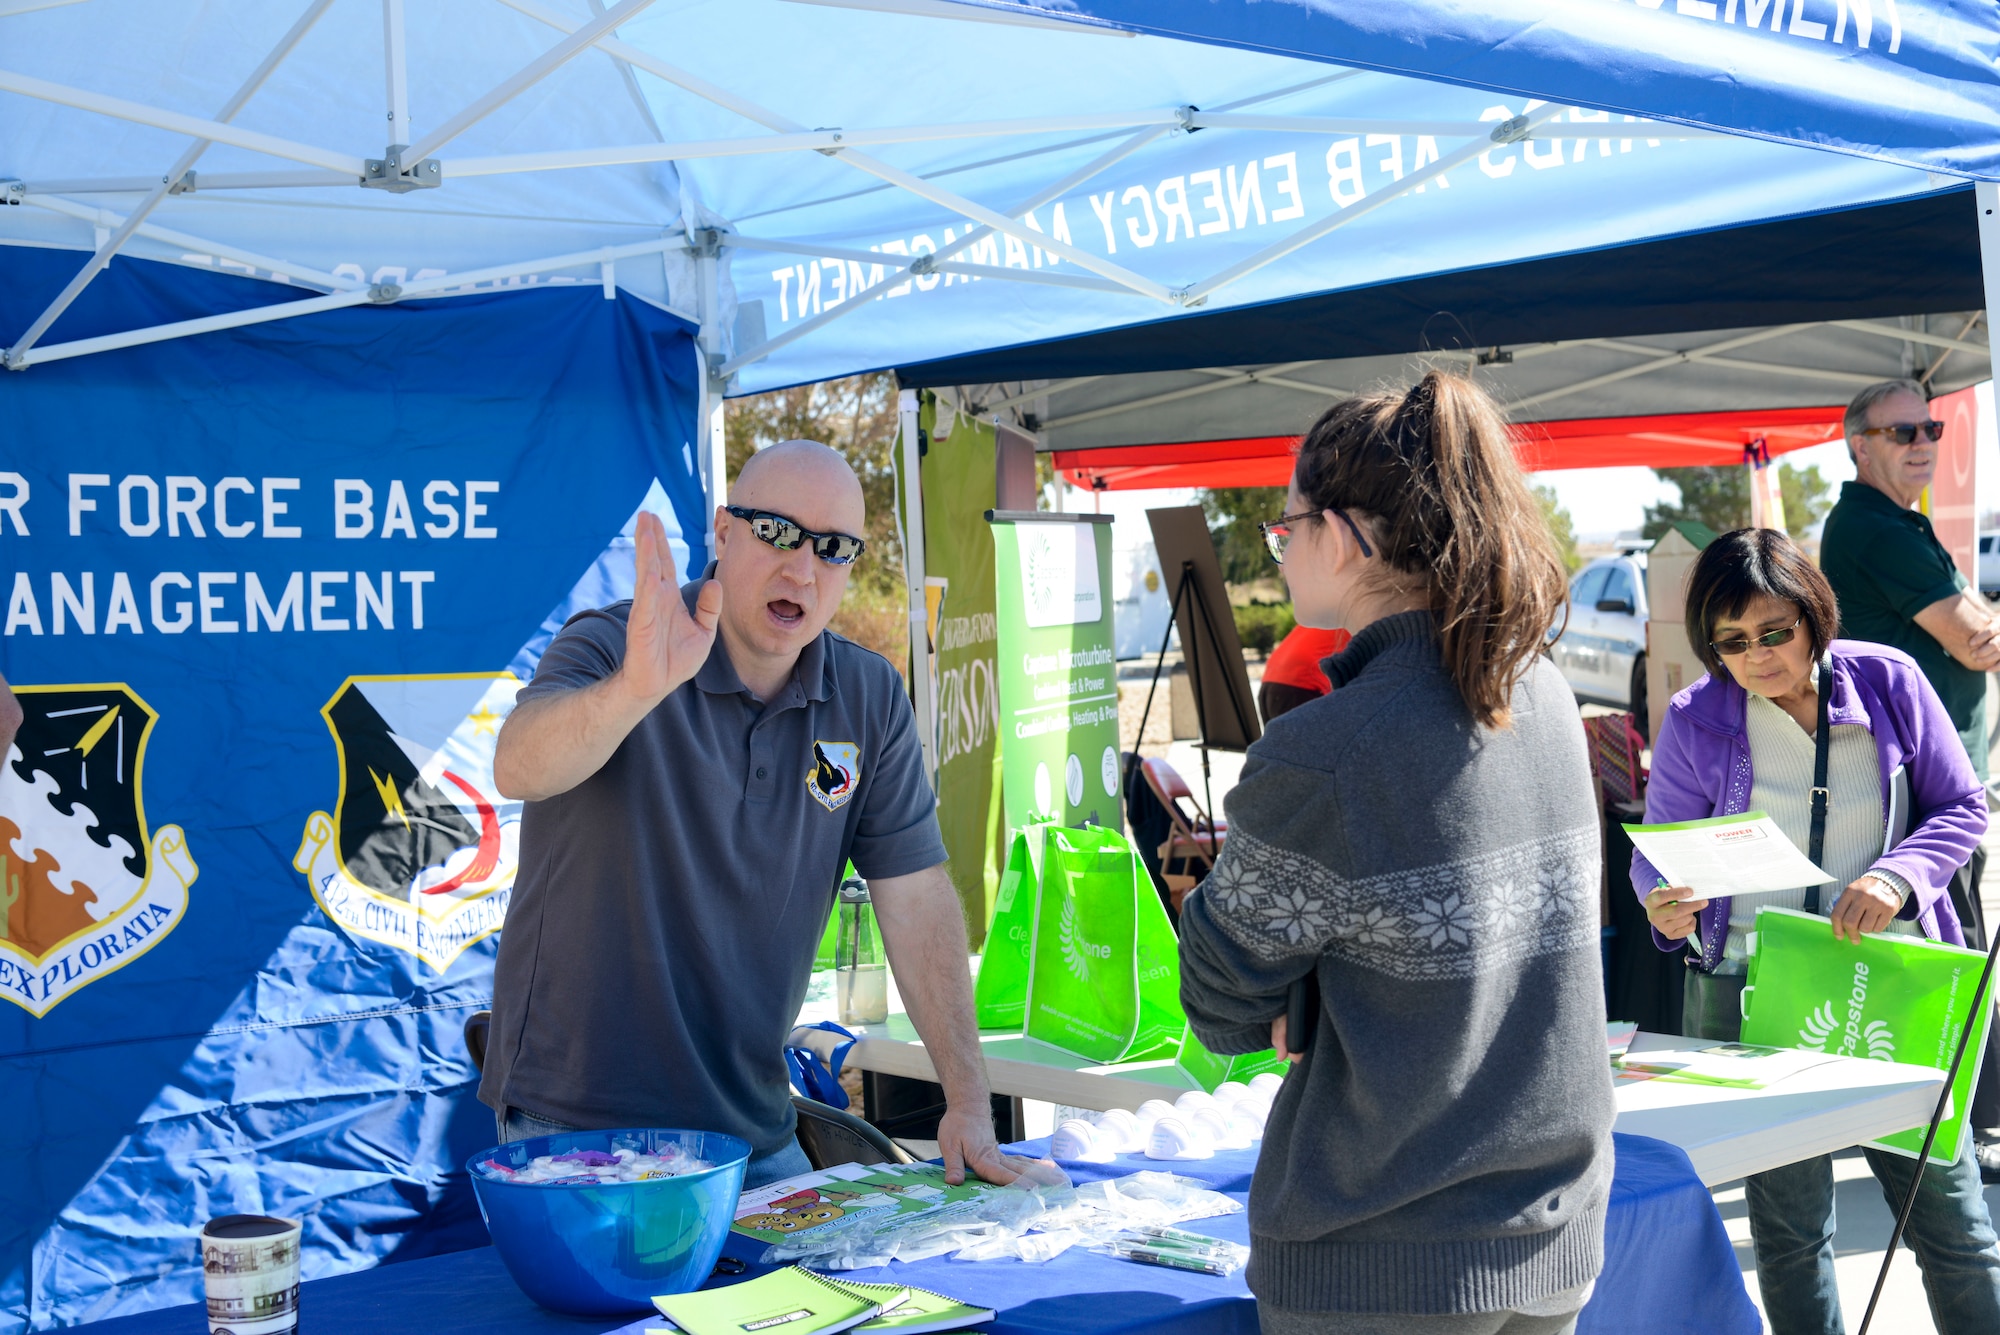 Richard Morris, 412th Civil Engineer Group Energy Management Section, talks with an Air Force spouse during the Energy Action Month event at the Base Exchange on Edwards Air Force Base, California, Oct. 17. (U.S. Air Force photo by Giancarlo Casem)